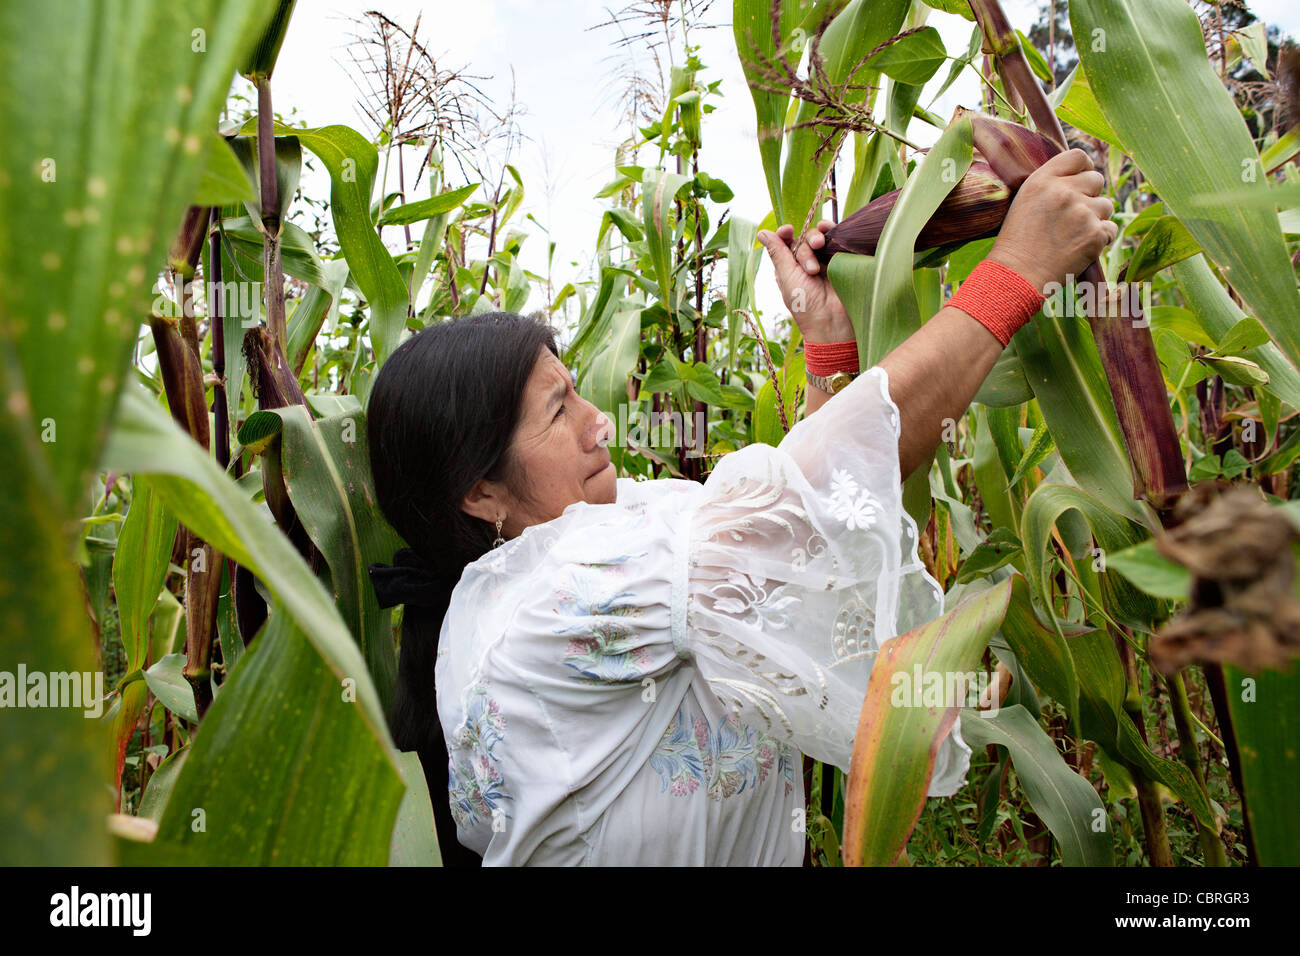 Woman wearing indigenous costume collecting corn (maize) in Otavalo, Ecuador. Stock Photo